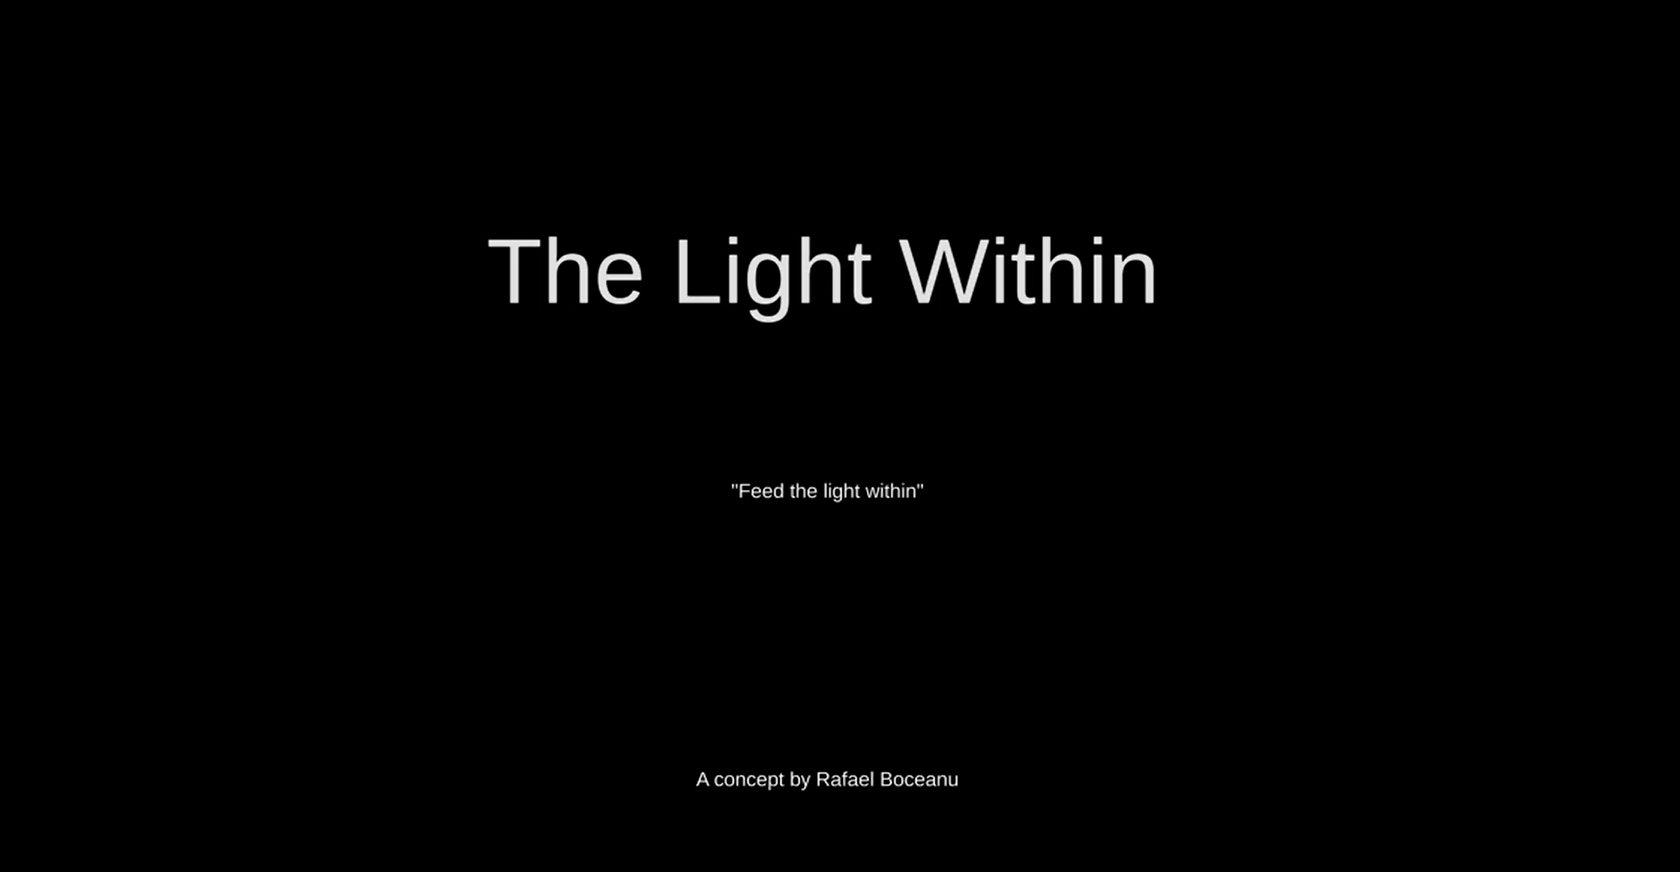 The Light Within